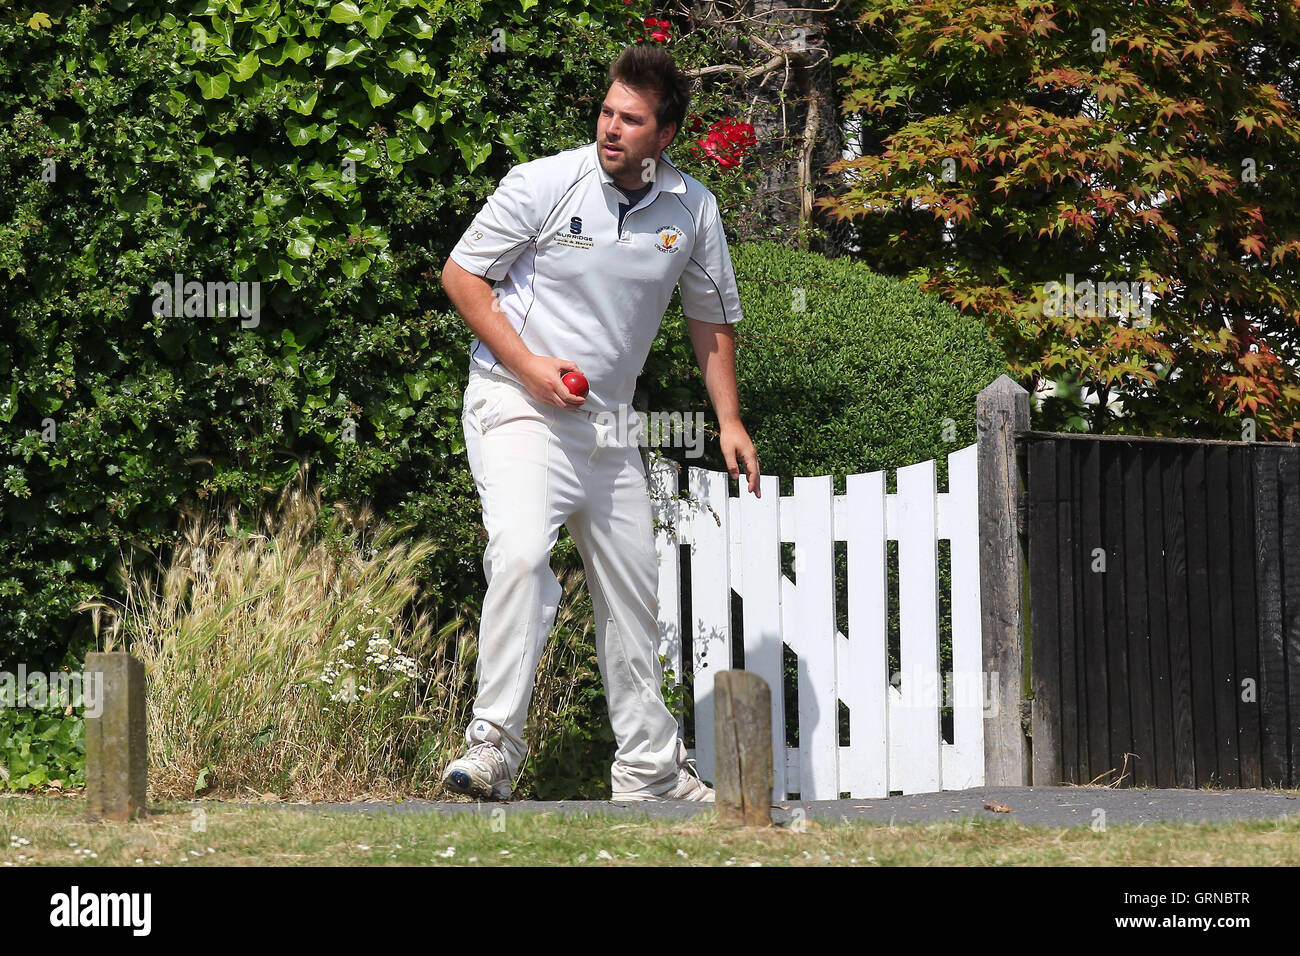 The ball is retrieved from a nearby garden - Herongate CC vs Havering-atte-Bower CC - Mid-Essex Cricket League - 21/06/14 Stock Photo